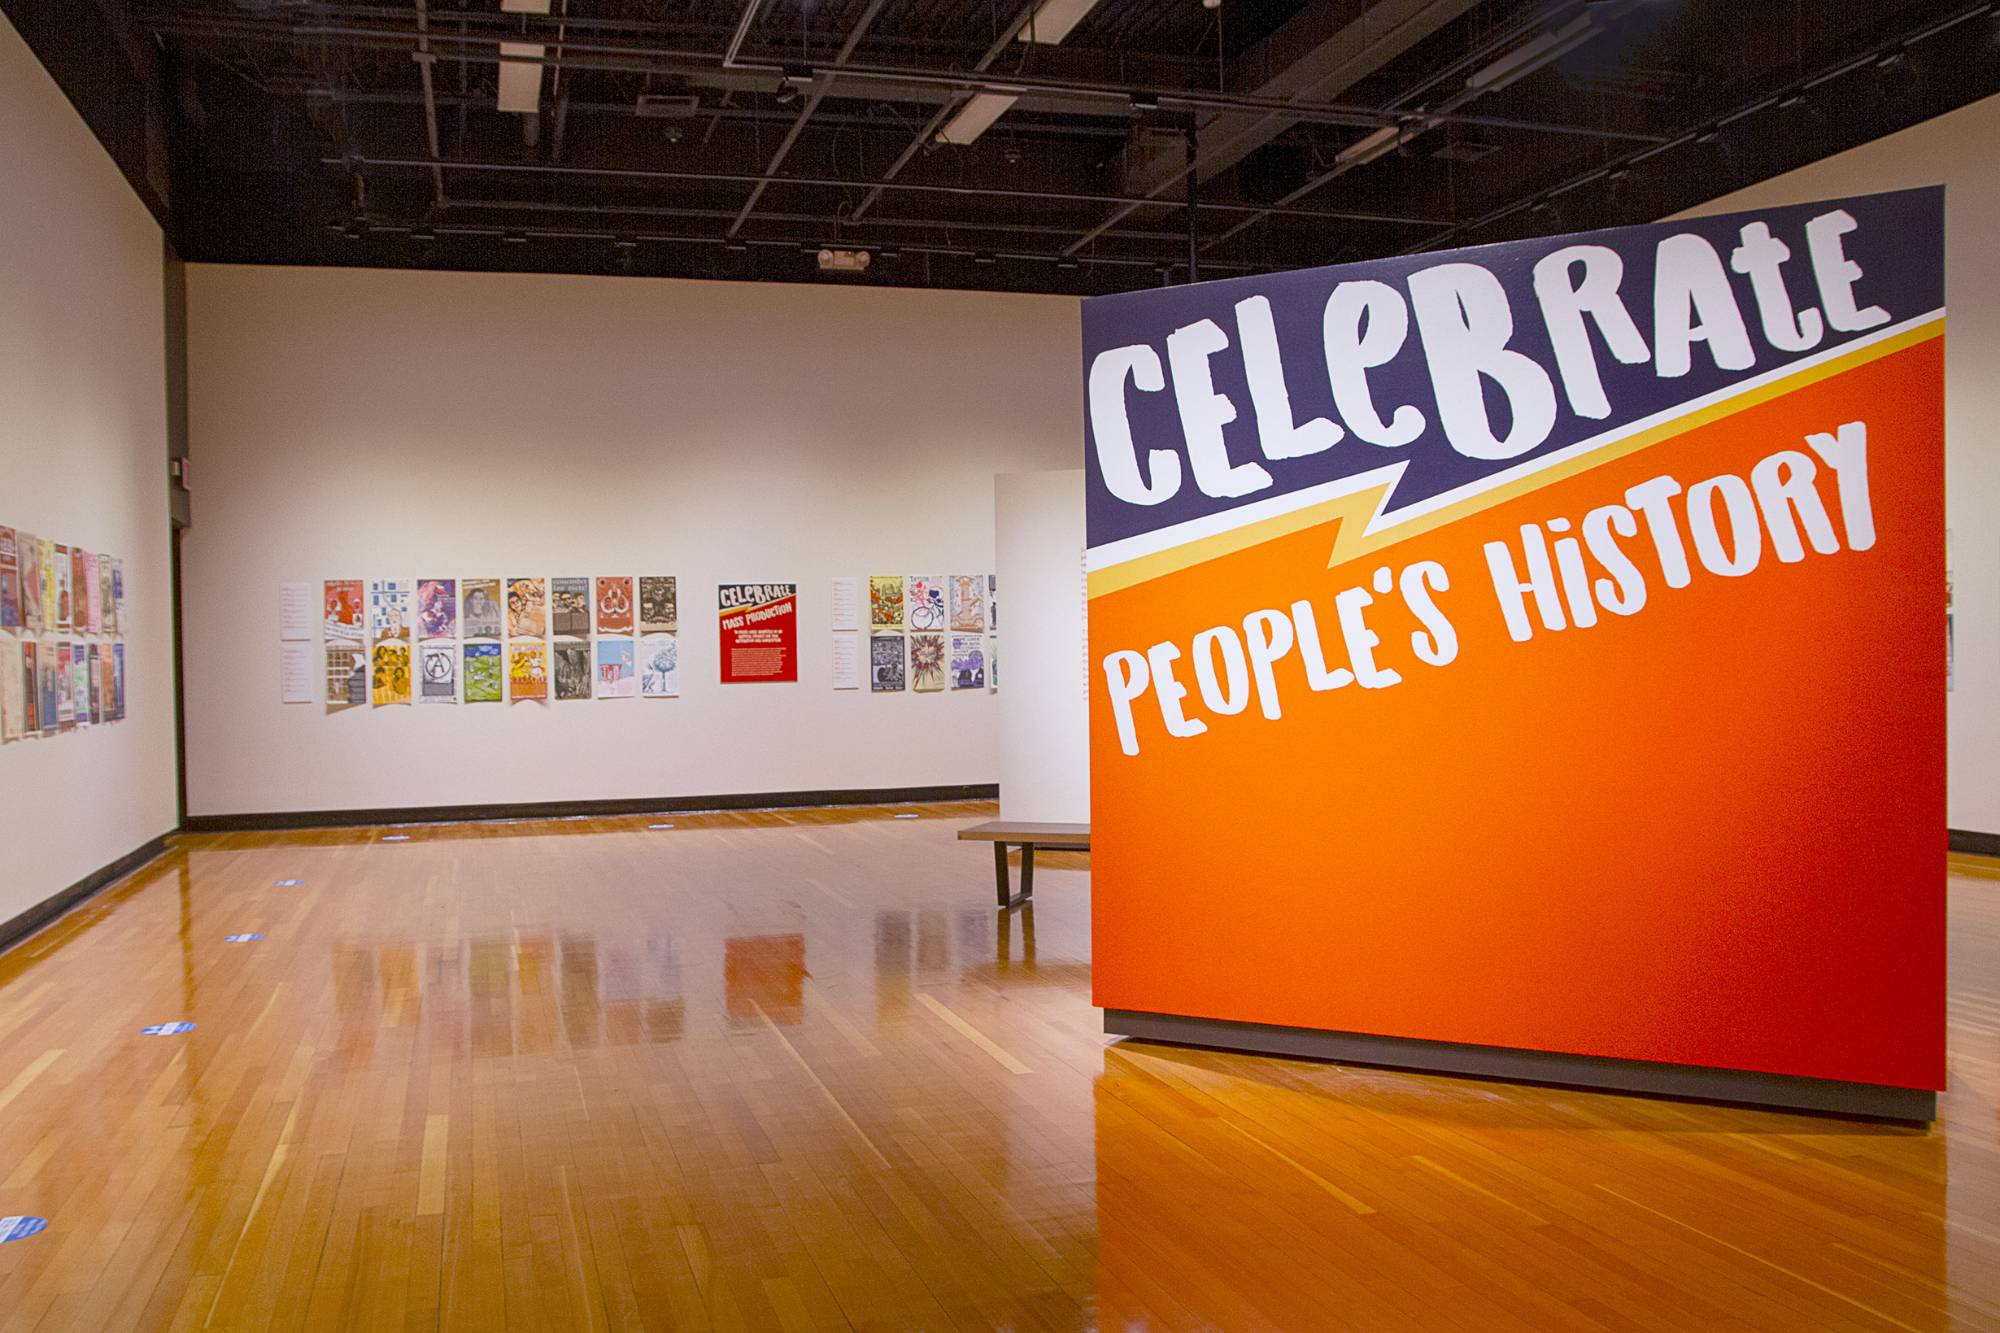 GVSU Art Gallery with the exhibition 'Celebrate People's History' on display